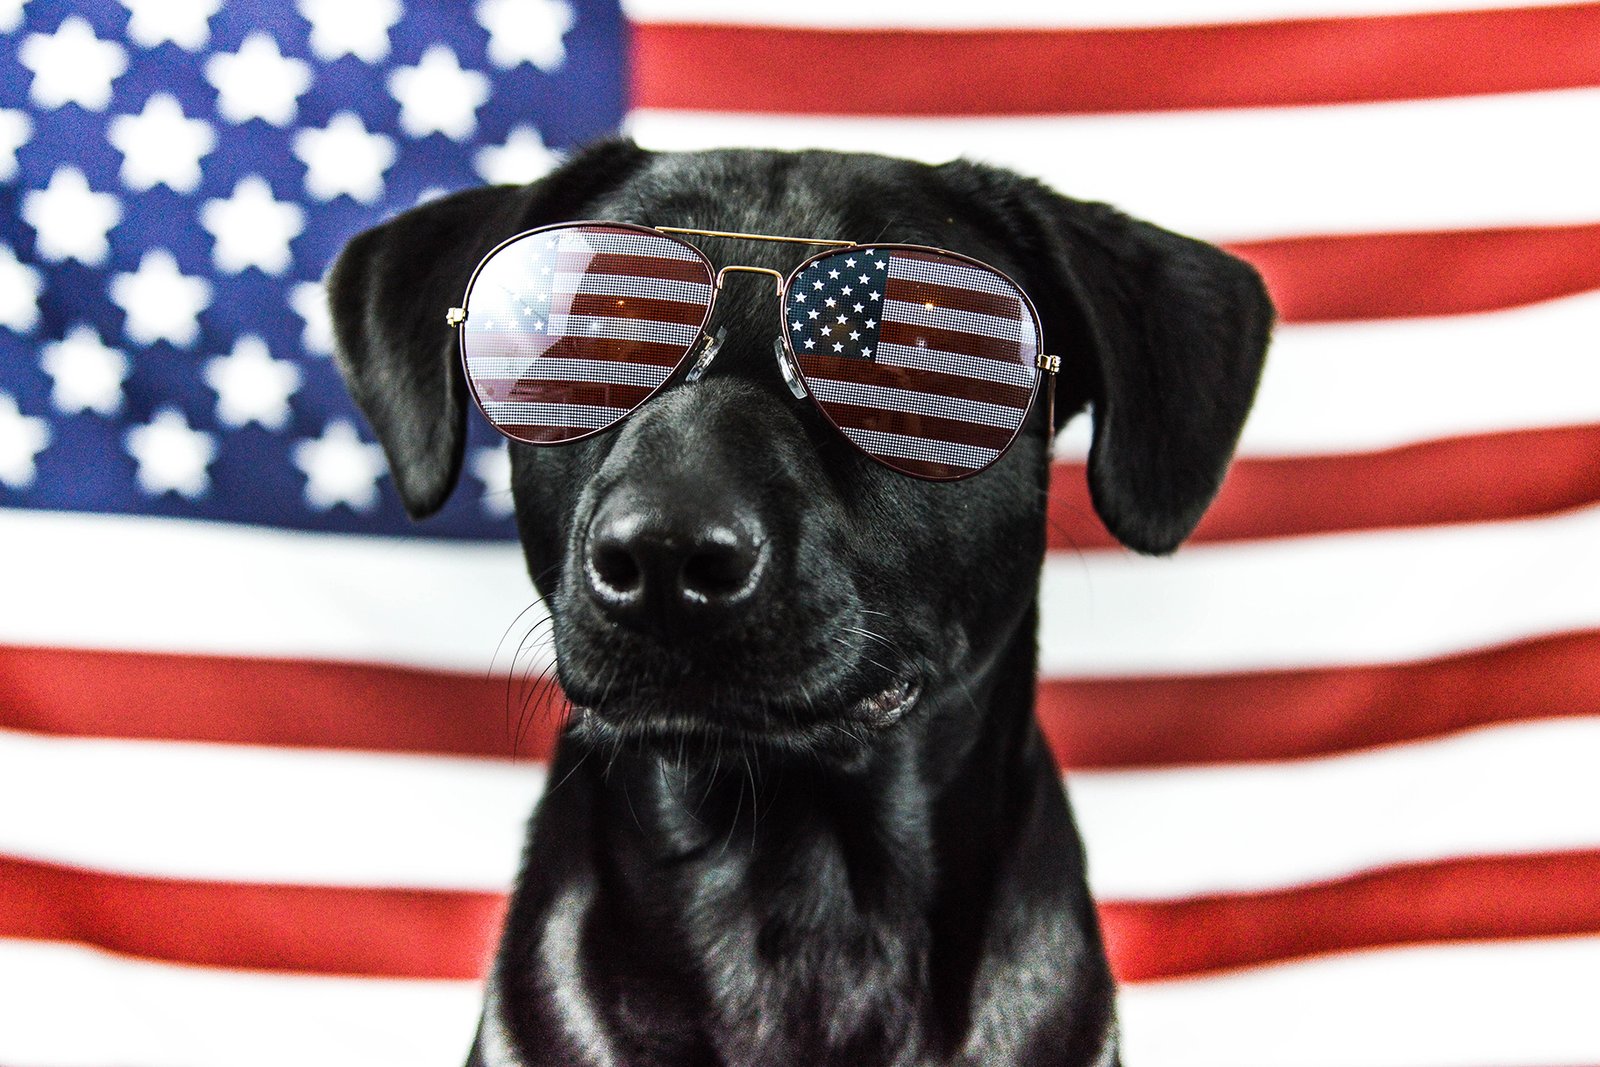 The U.S. has the highest dog population in the world.